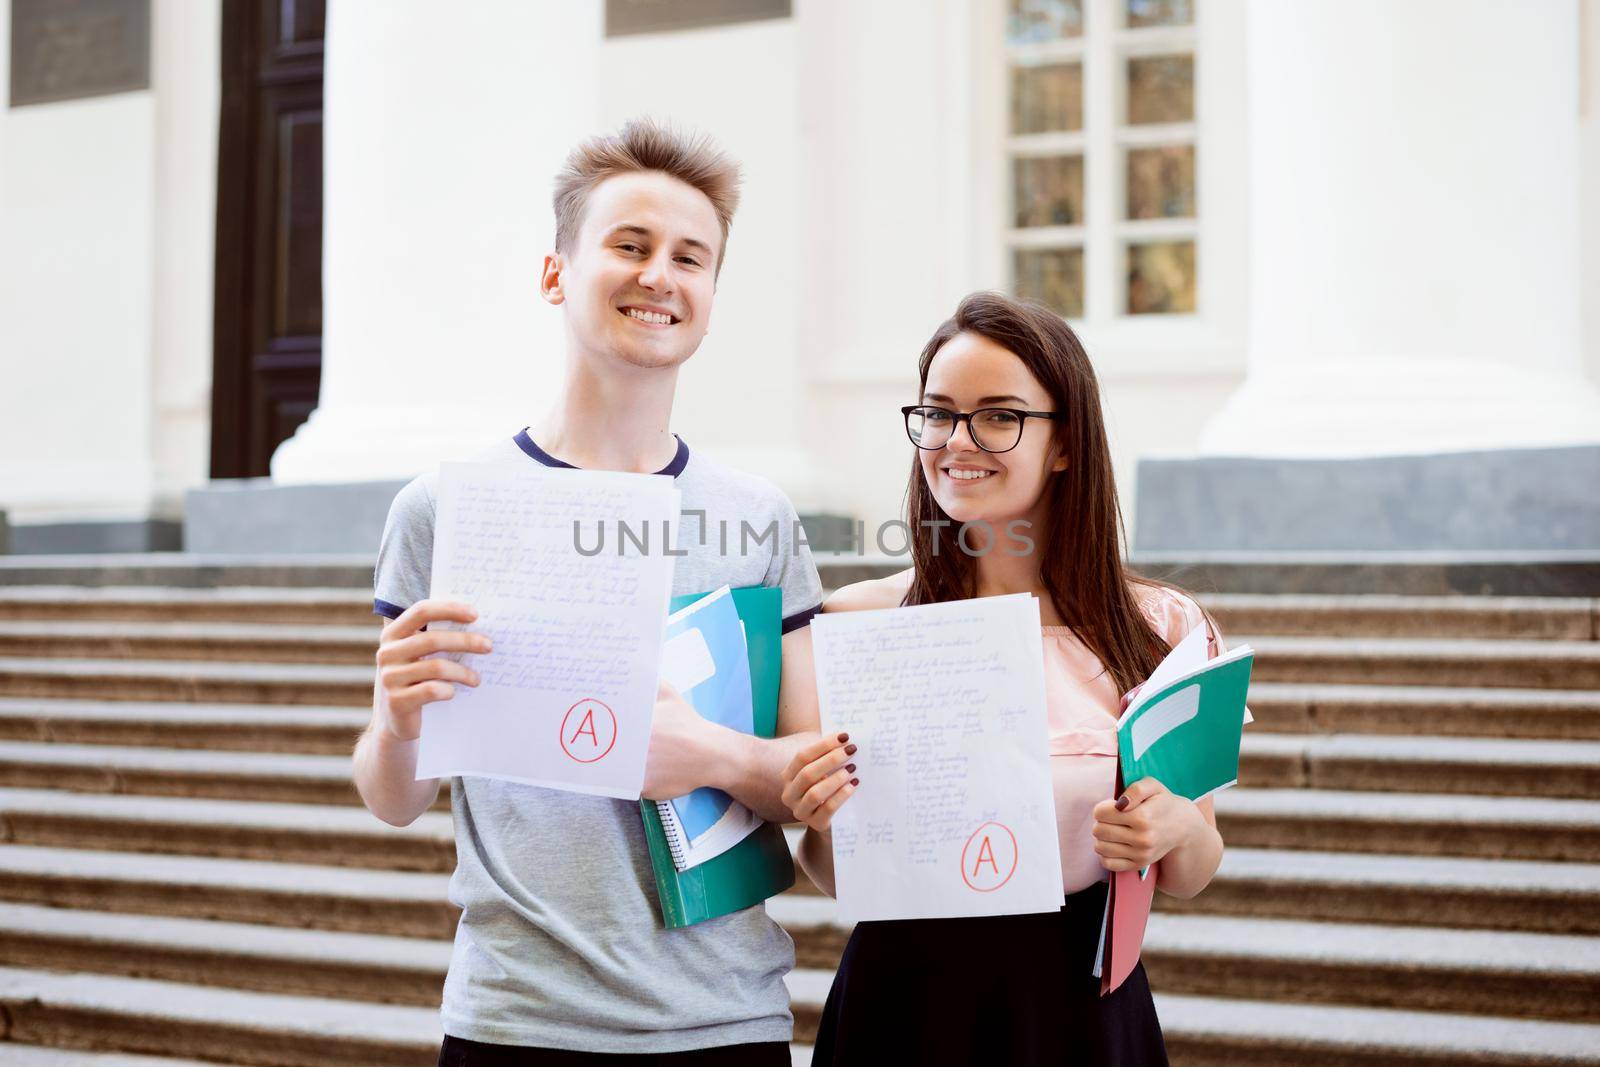 Male and female teenagers standing in front of university showing excellent results of entrance exam, happy to become students of a popular university and study hard